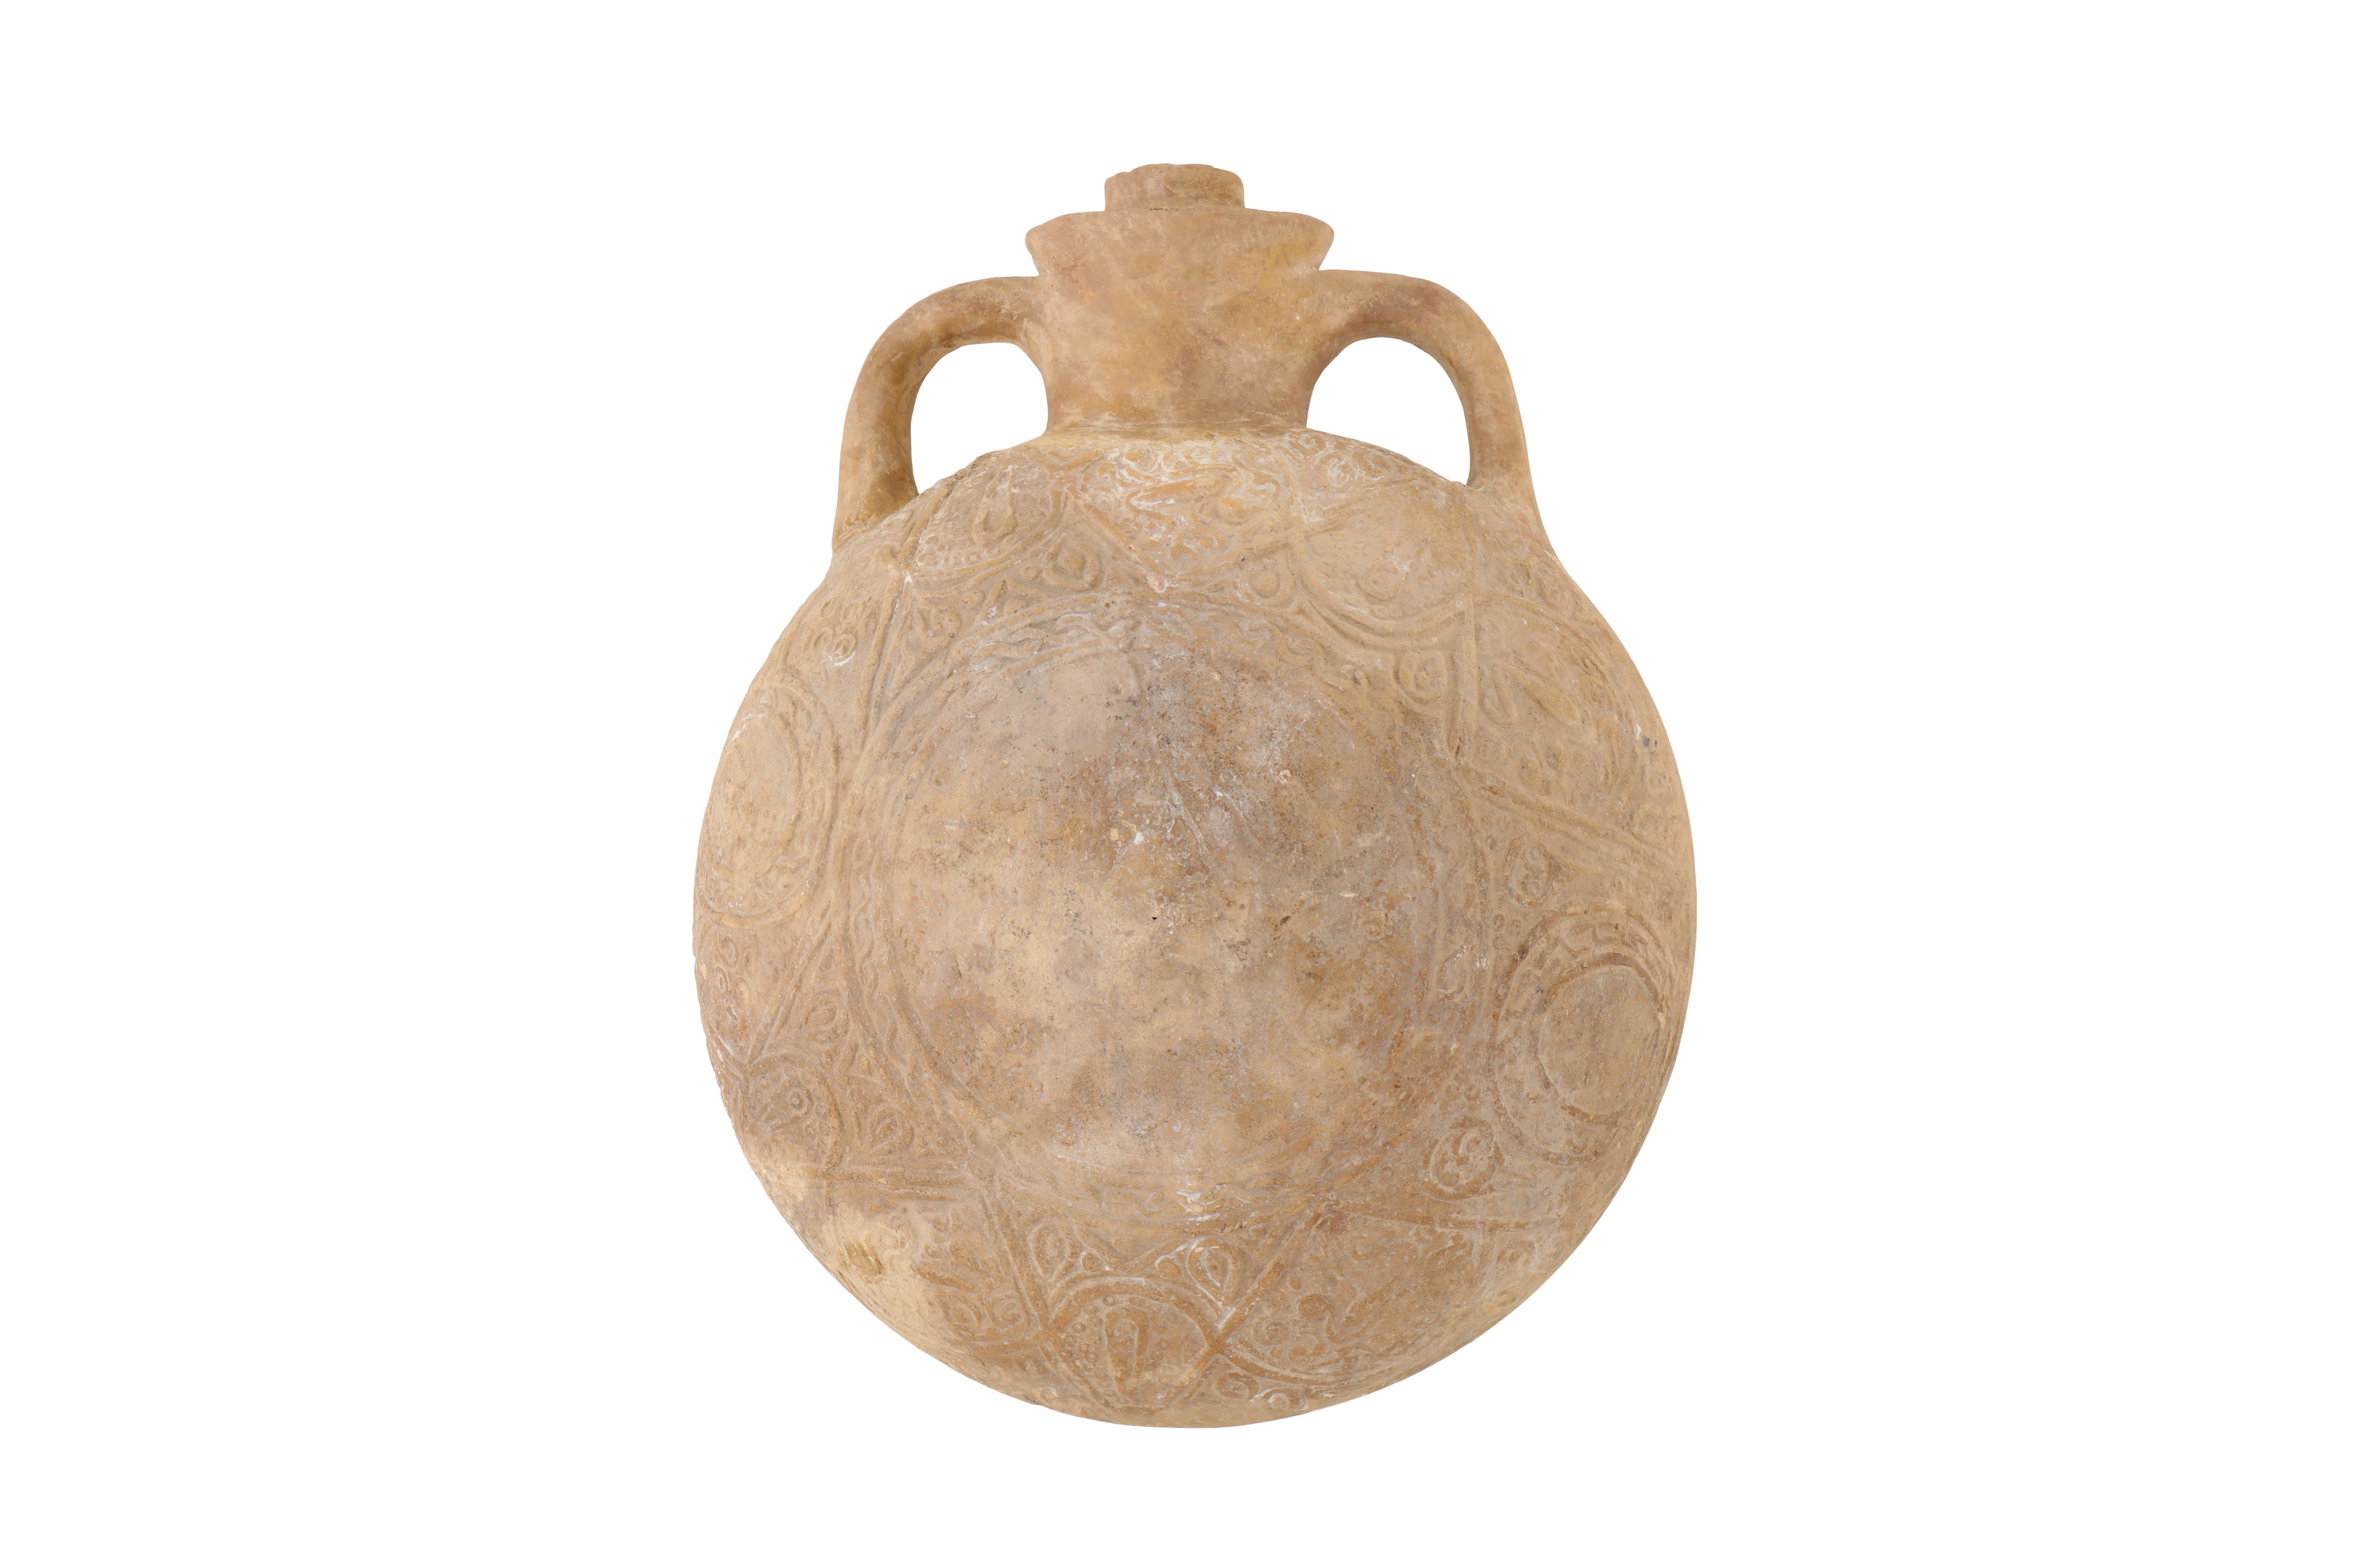 A 12TH-14TH CENTURY PERSIAN UNGLAZED MOULDED POTTERY PILGRIM FLASK - Image 4 of 4